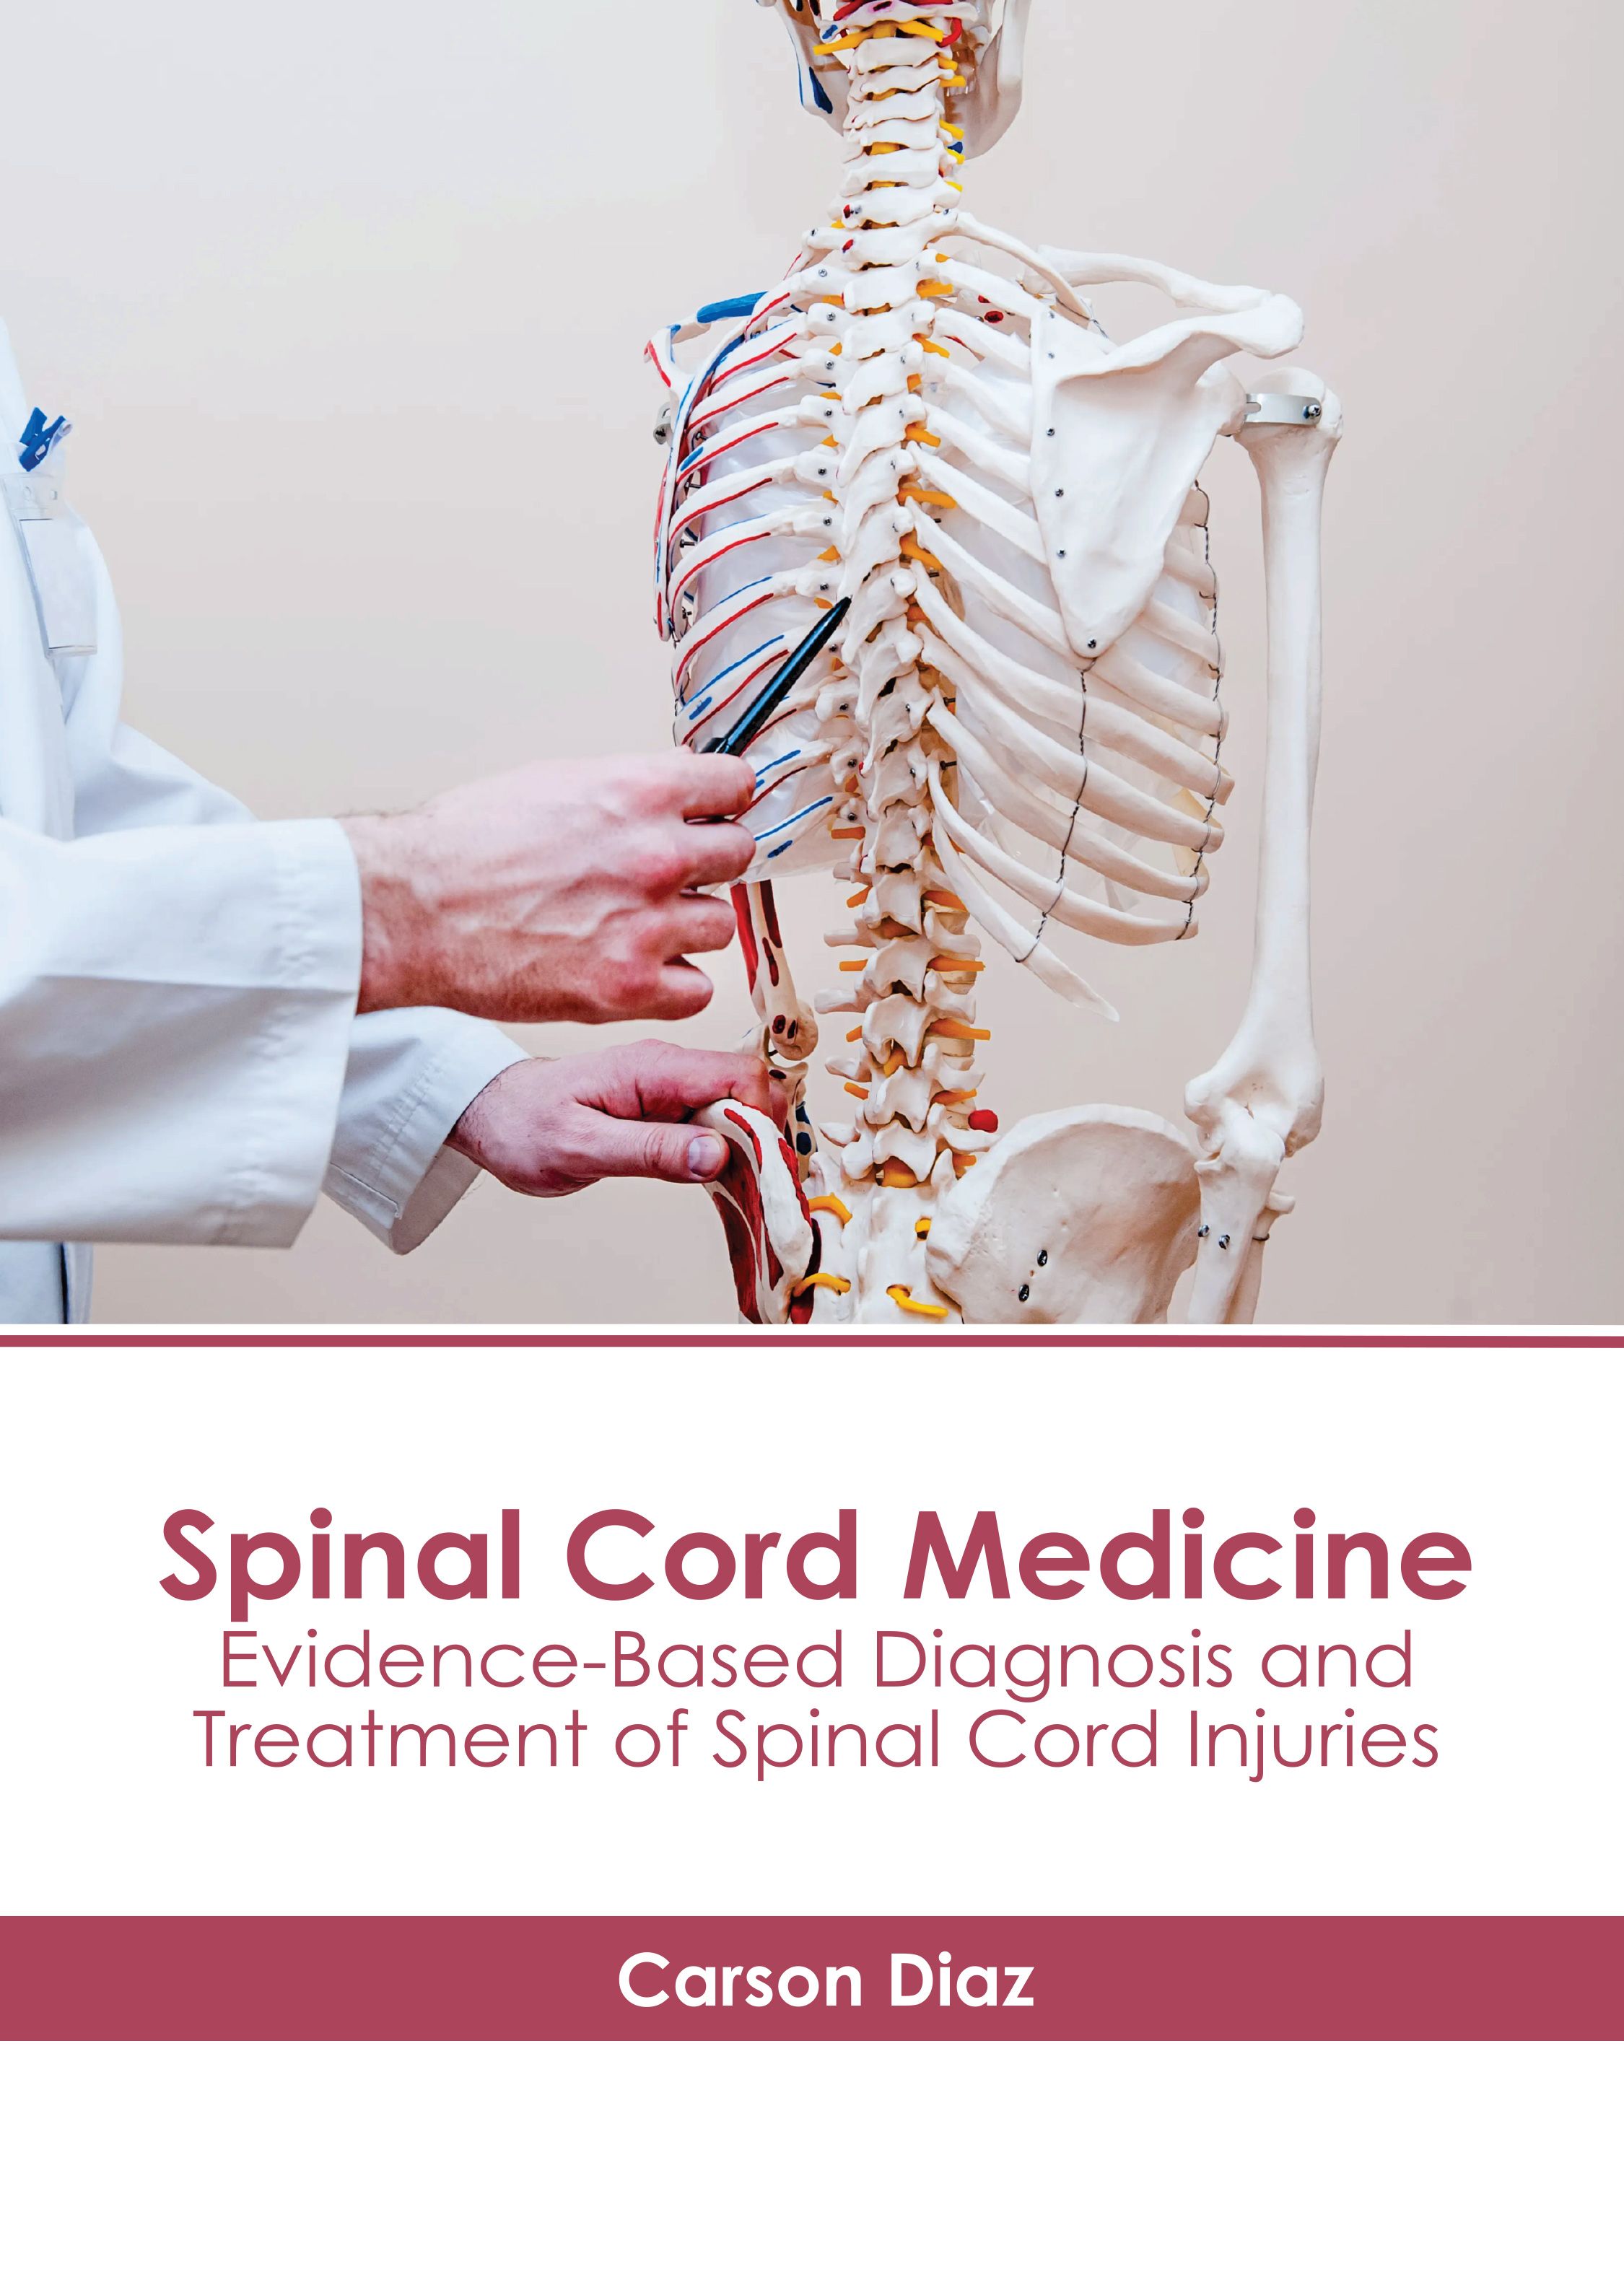 SPINAL CORD MEDICINE: EVIDENCE-BASED DIAGNOSIS AND TREATMENT OF SPINAL CORD INJURIES